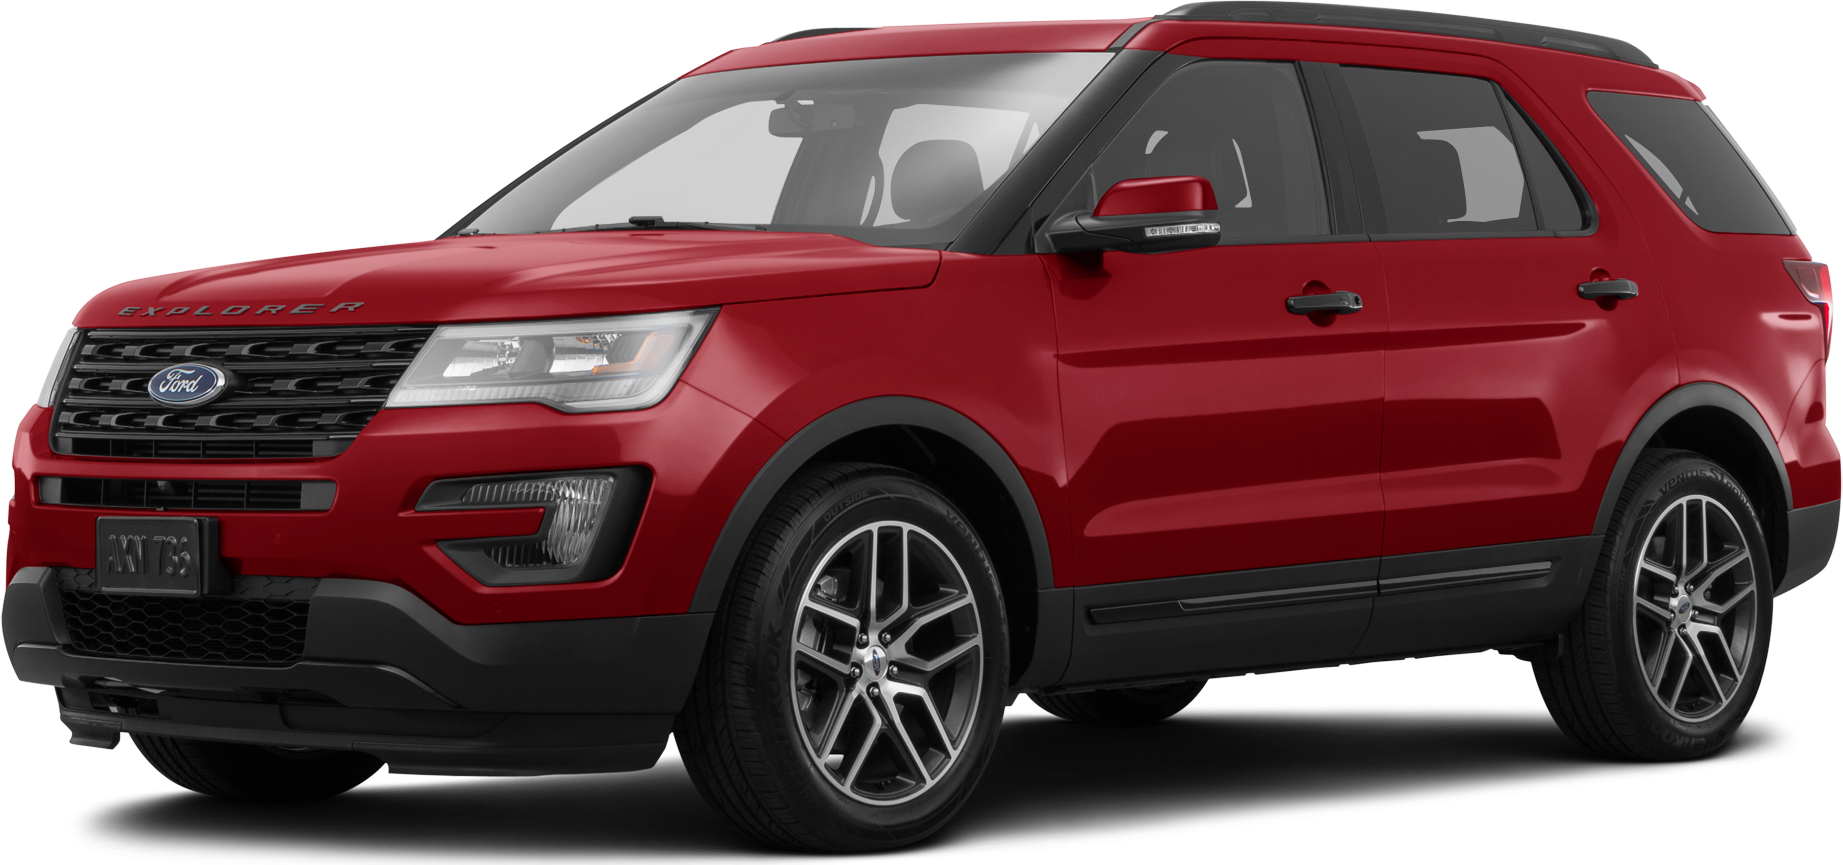 2017 Ford Explorer Review Pricing and Specs